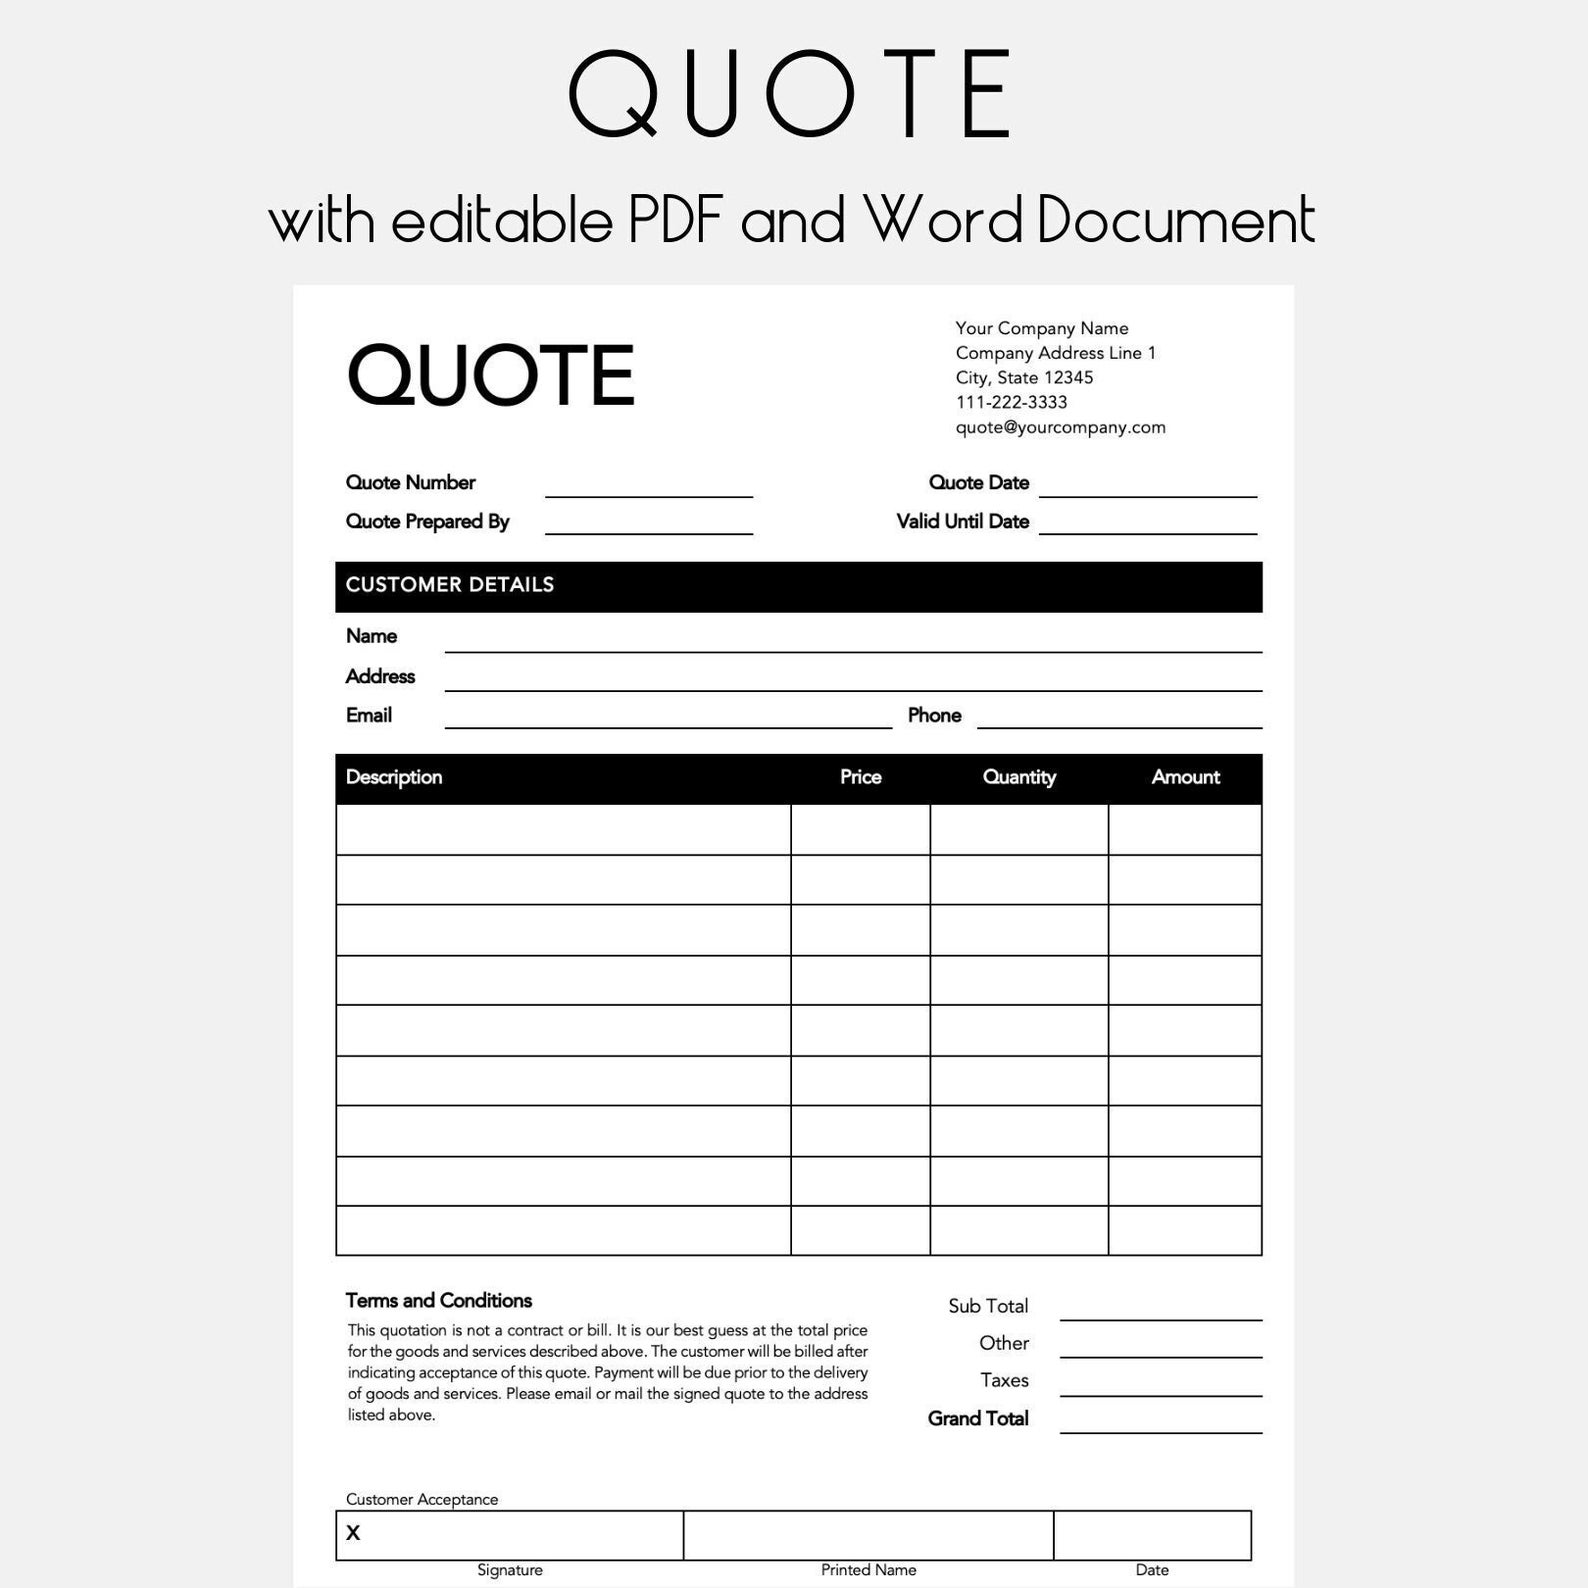 quote-template-pdf-microsoft-word-quote-form-job-quote-job-etsy